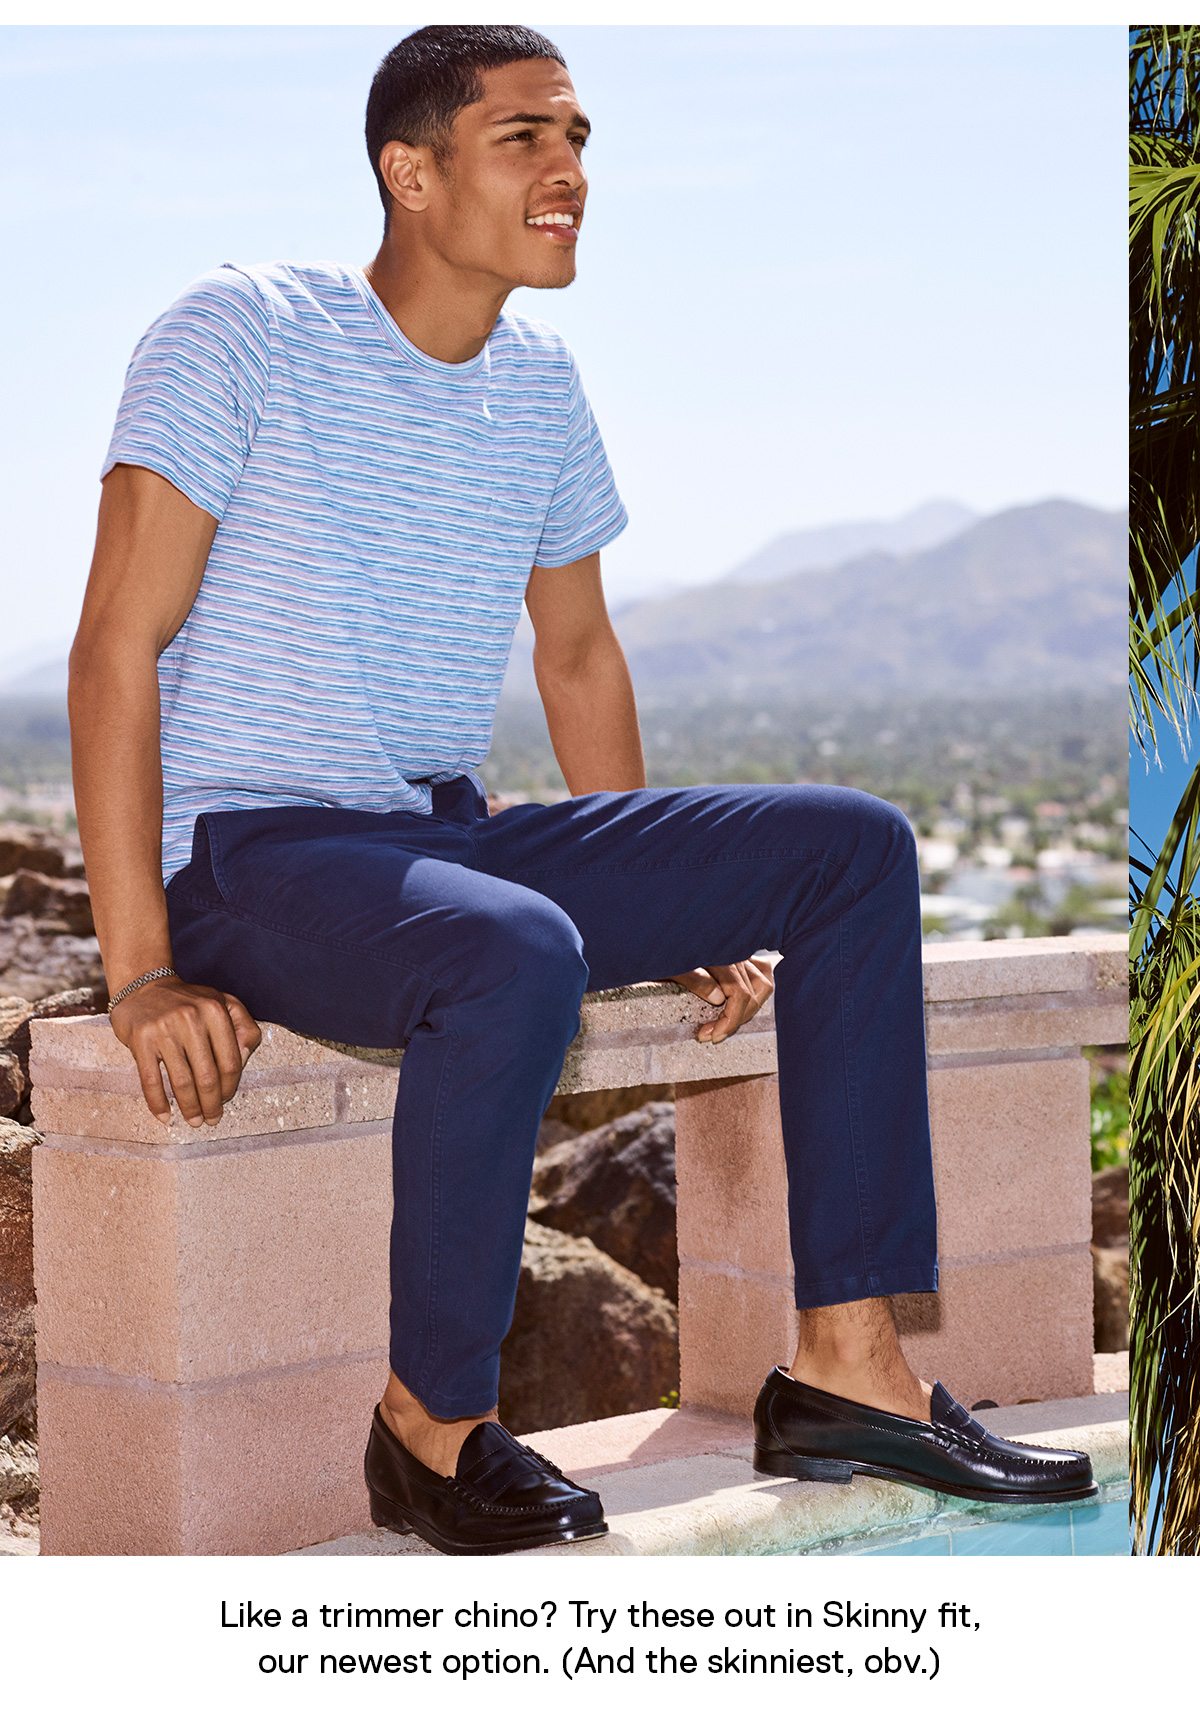 Like a trimmer chino? Try these out in Skinny fit, our newest option. (And the skinniest, obv.)